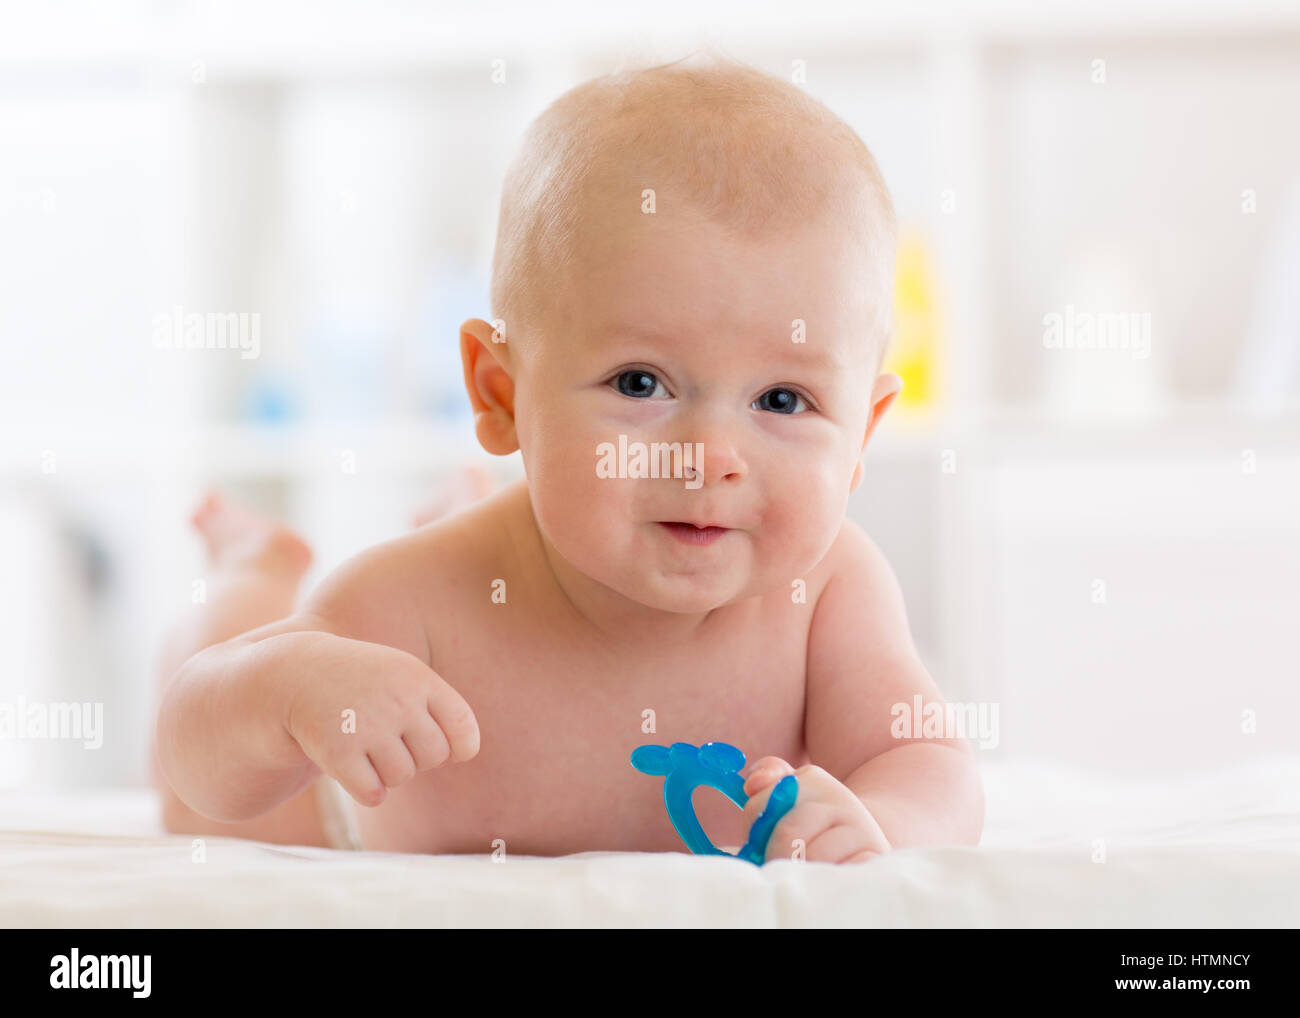 Portrait of adorable baby. Kid boy lying on his stomach and holding teether toy. Stock Photo